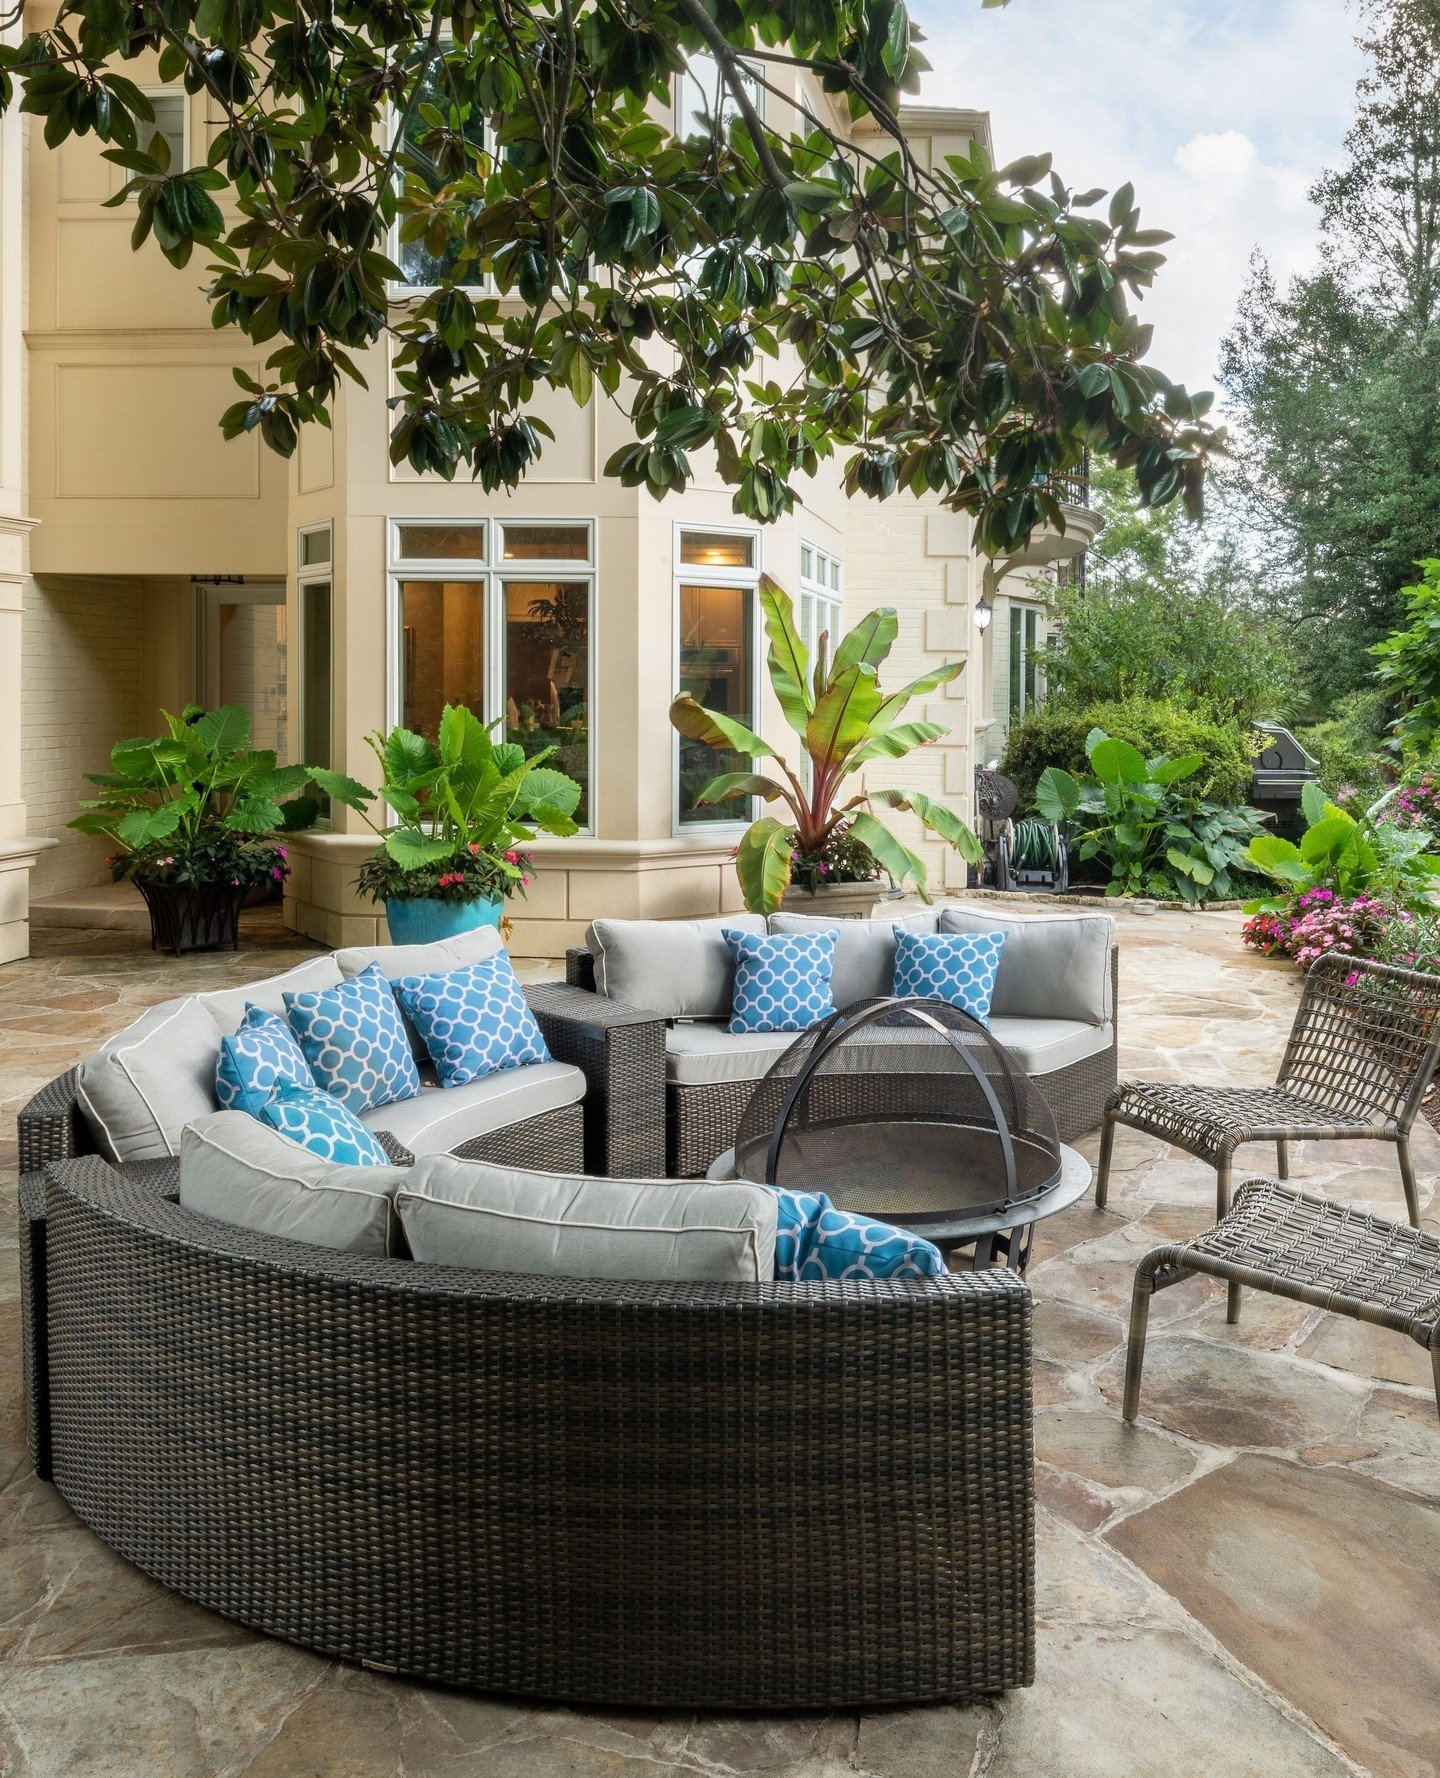 Embrace the outdoor bliss as warmer weather arrives, inviting relaxation in this serene space. #MondayMagic